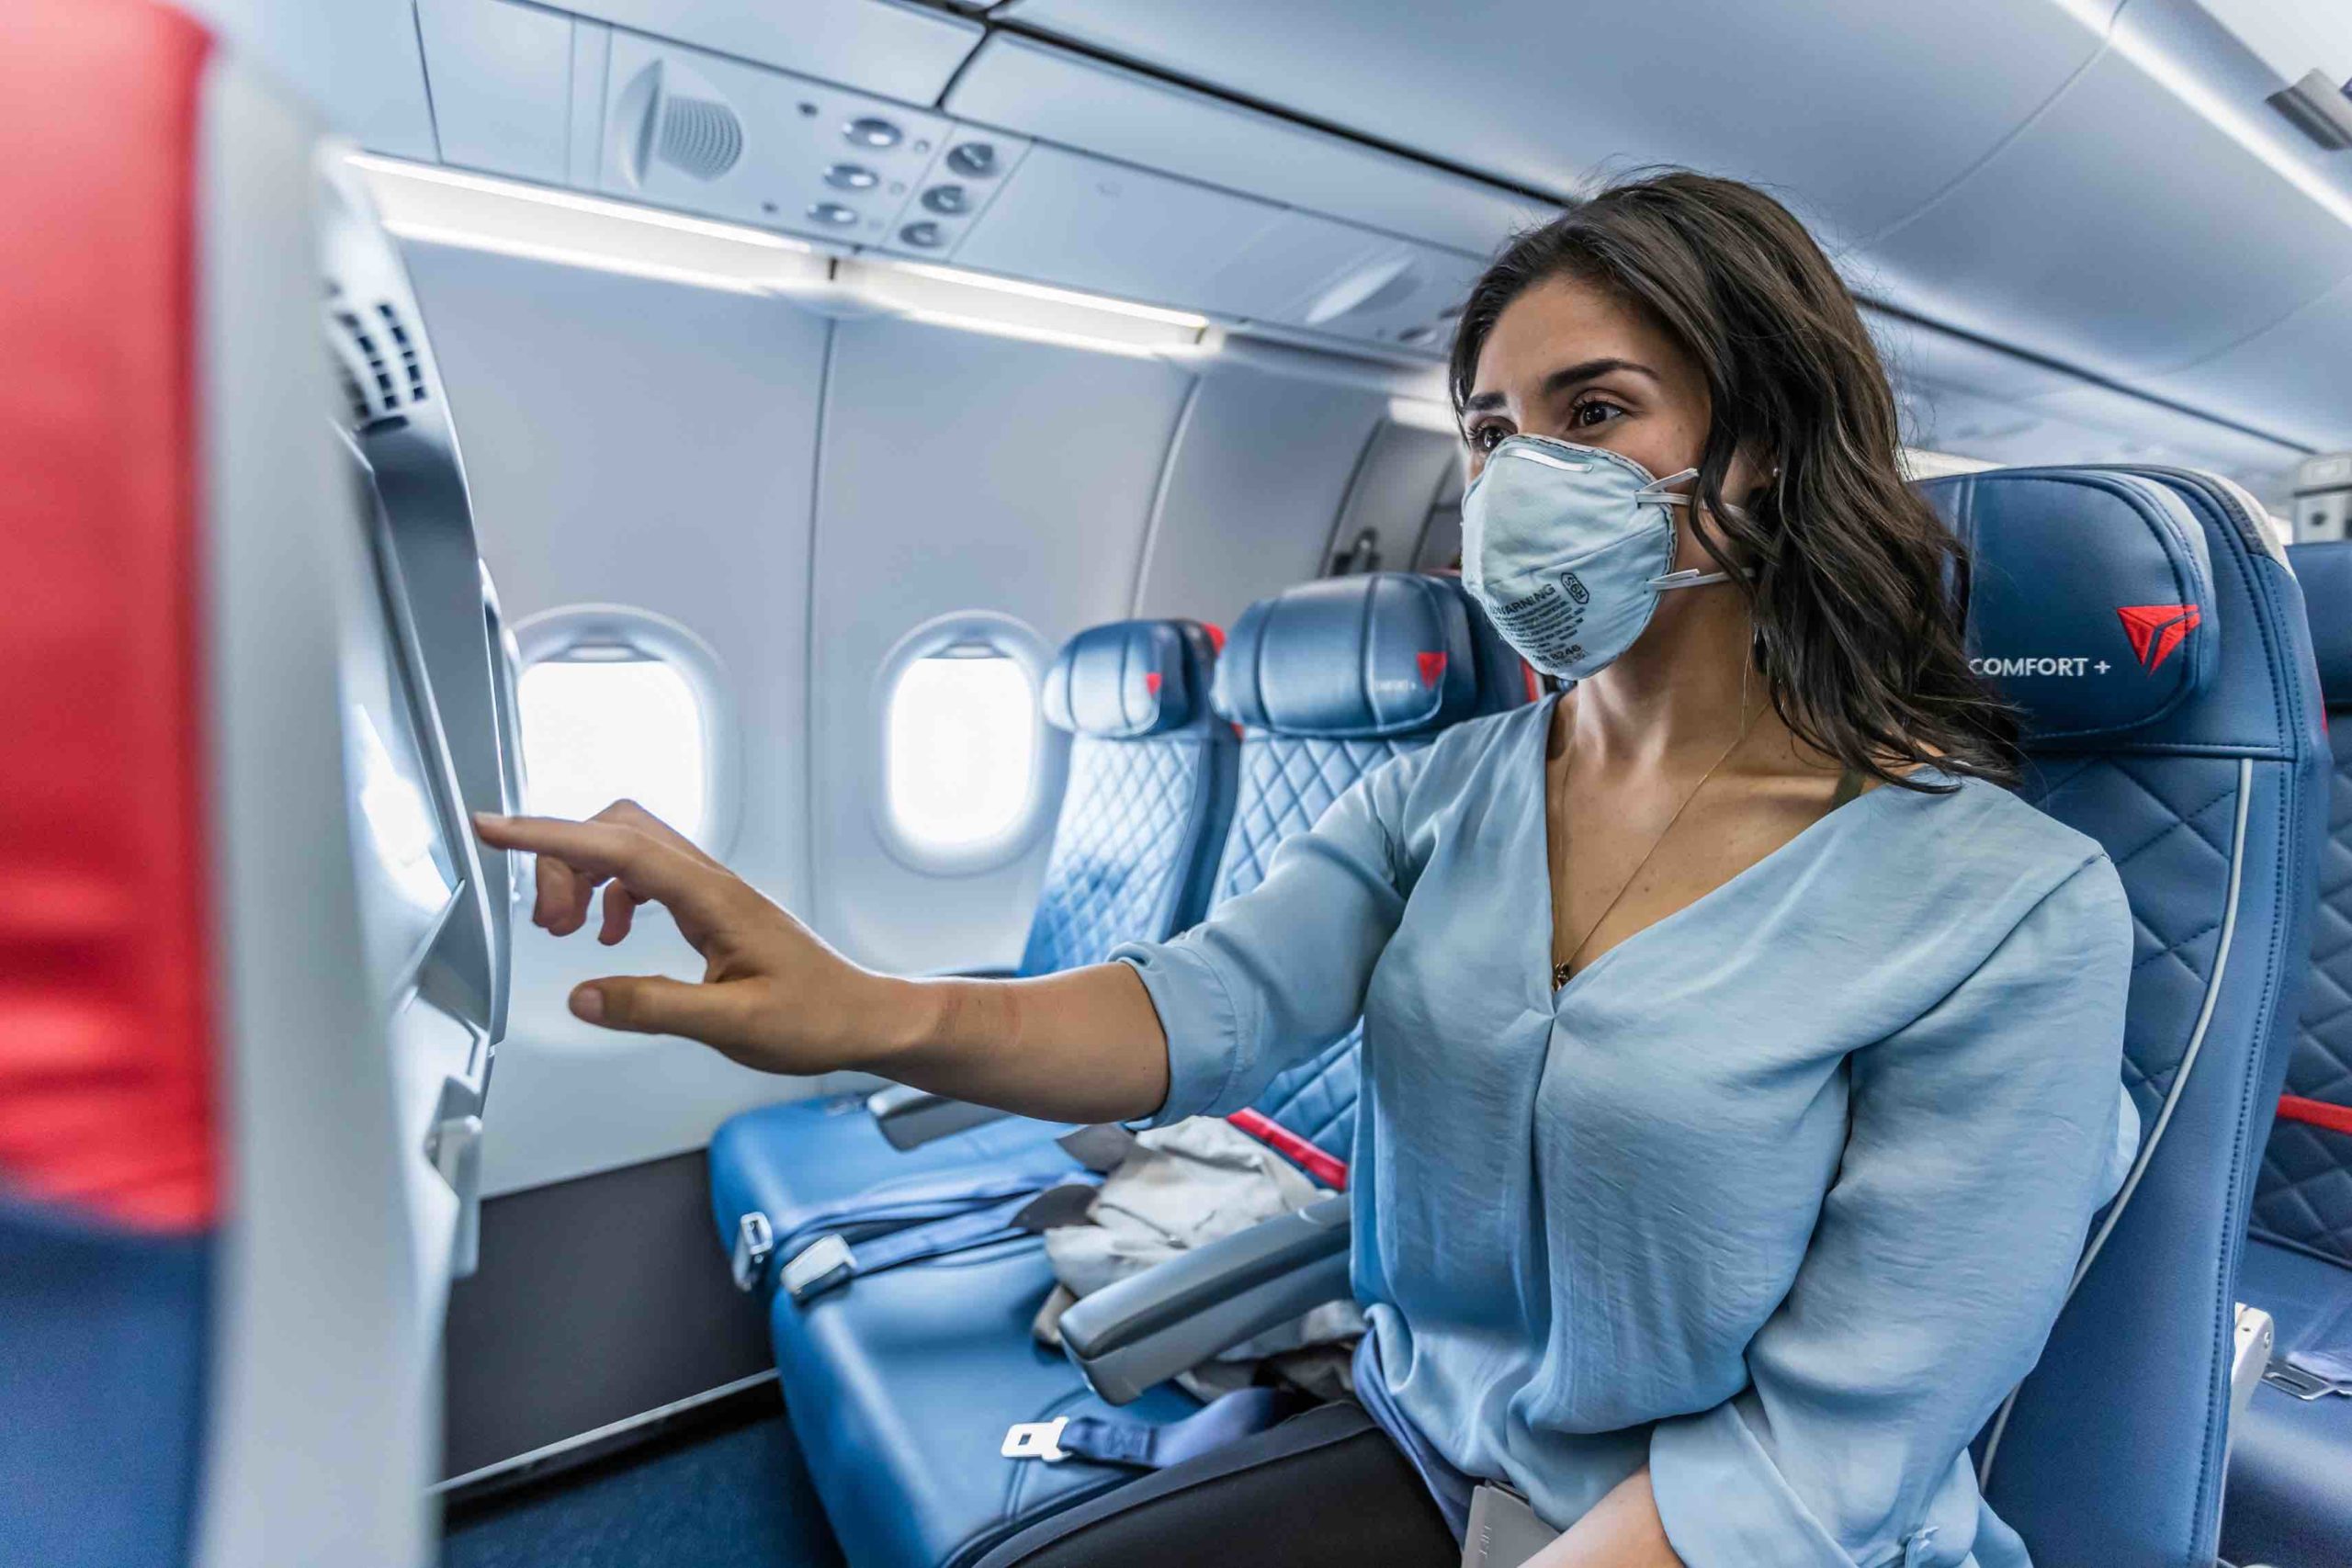 US Judge Ends Airline Mask Mandate, But Airlines Still Require Them